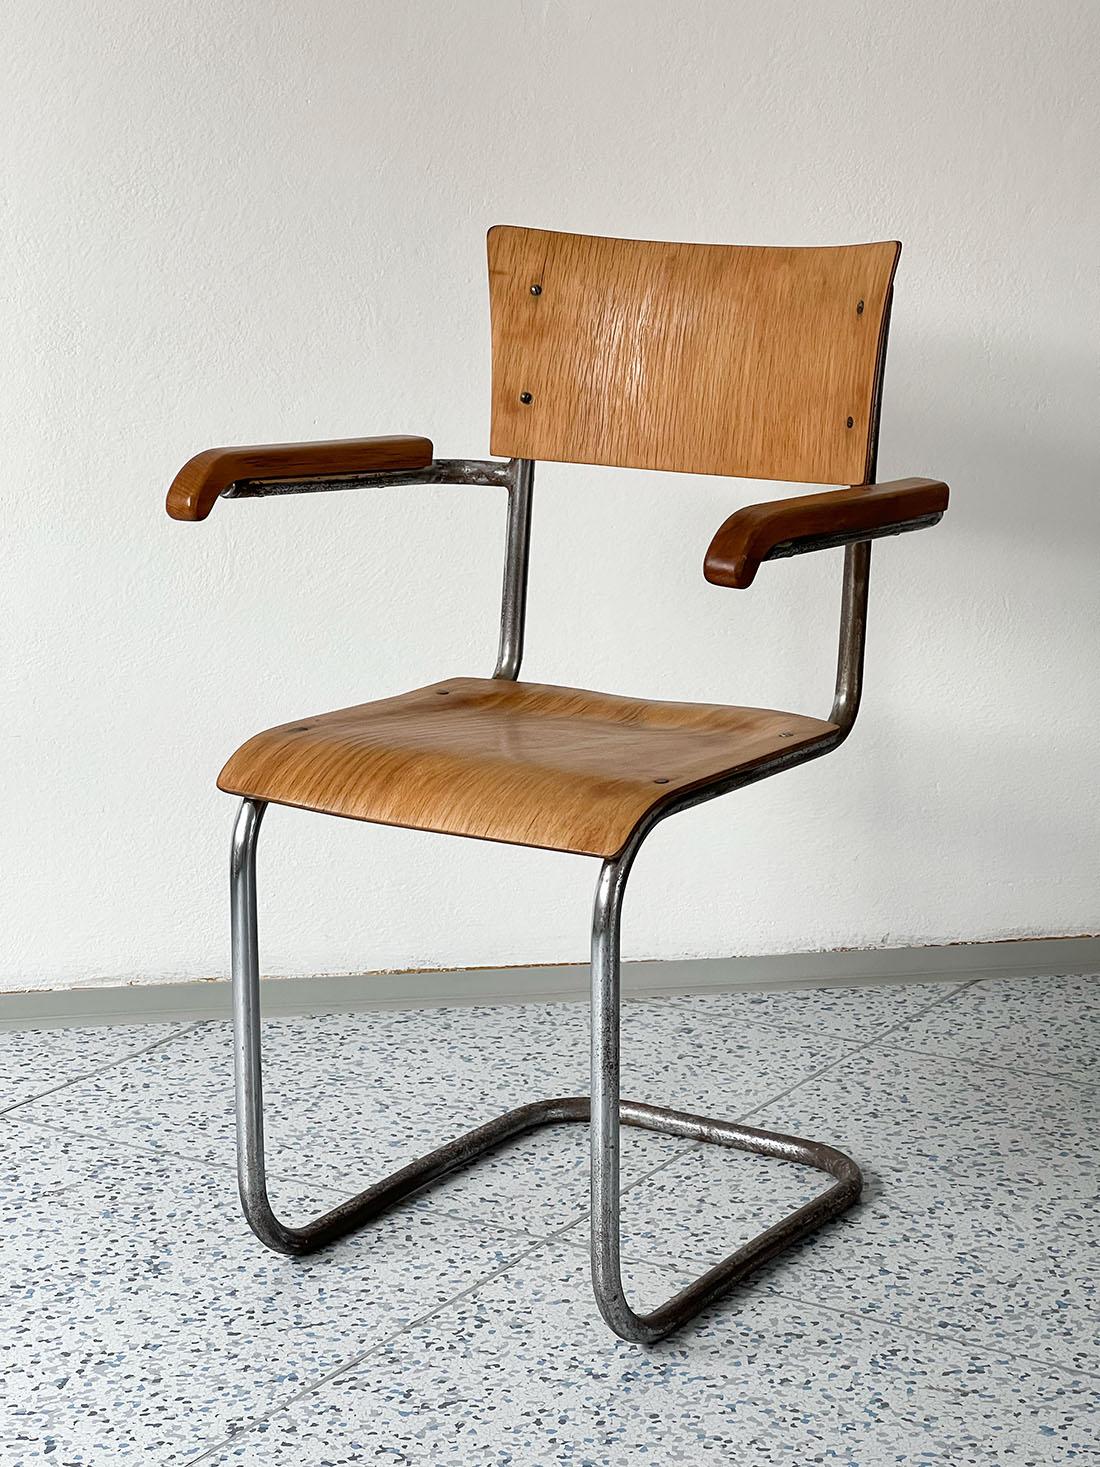 Bauhaus cantilever plywood and walnut armchair, model K10, designed by Robert Slezák for Slezákovy Závody in Czechoslovakia, 1930s.

Offered in its original condition, the K10 armchair by the Czechoslovak designer Robert Slezák is quite rare and